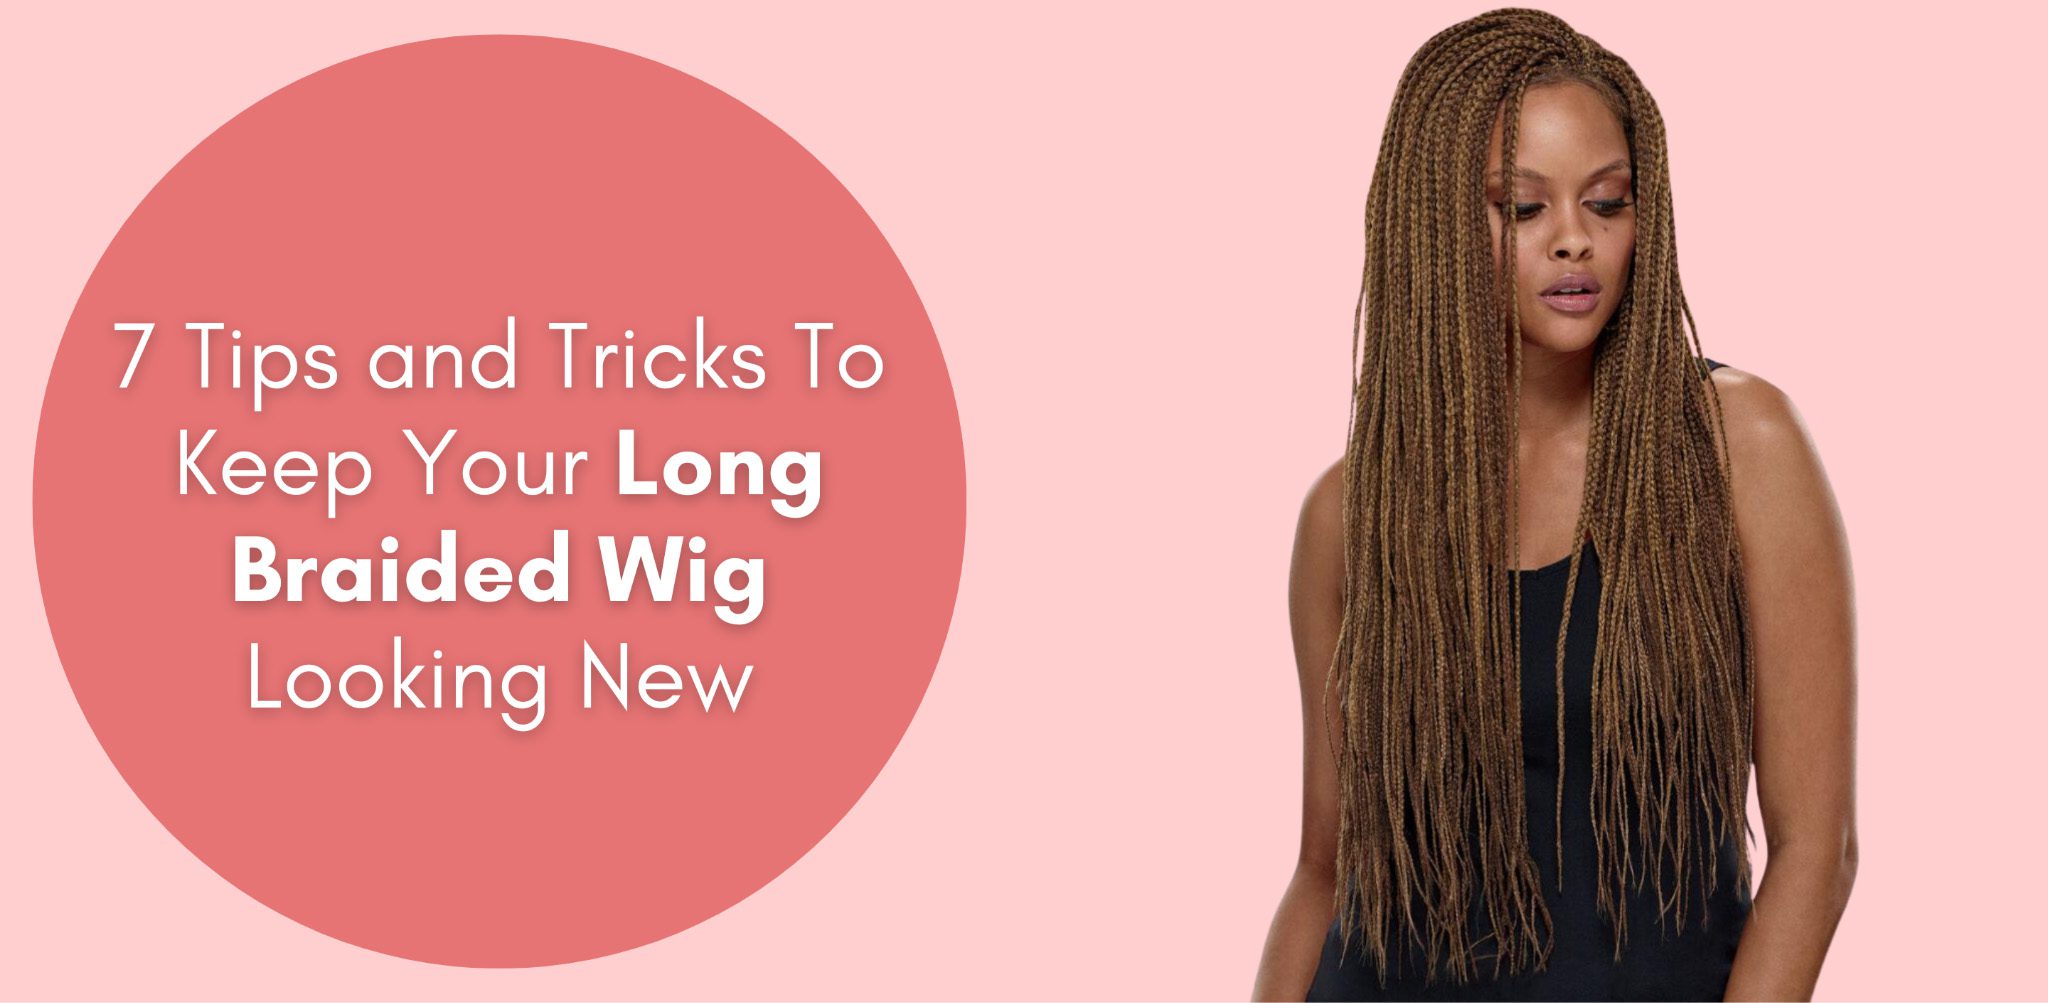 7 Tips and Tricks To Keep Your Long Braided Wig Looking New